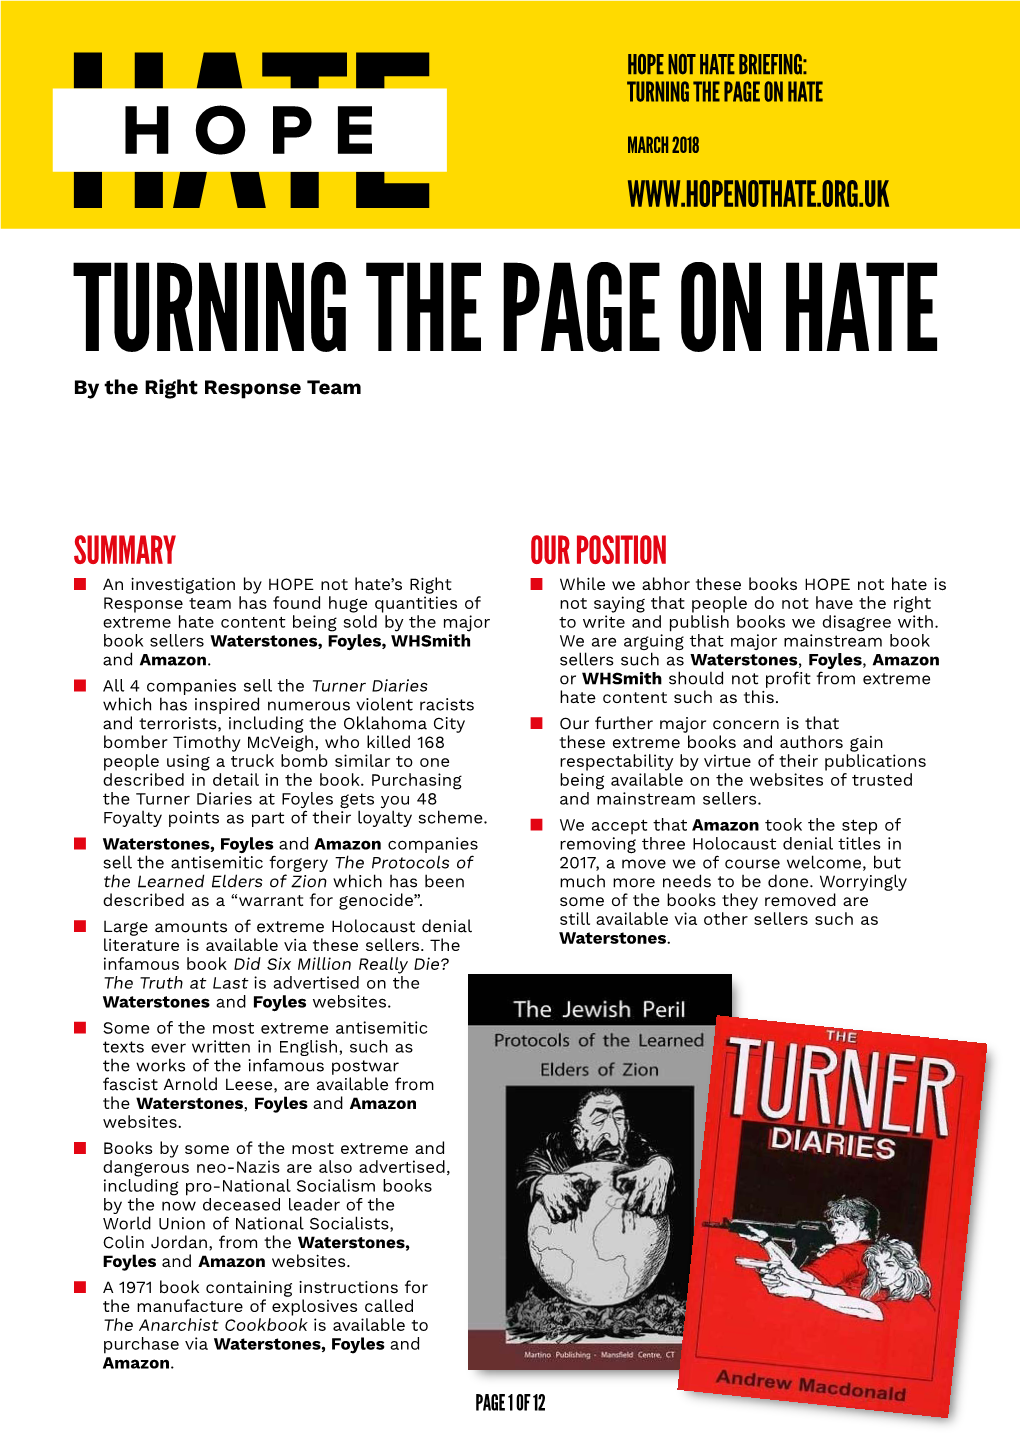 'Turning the Page on Hate' Briefing